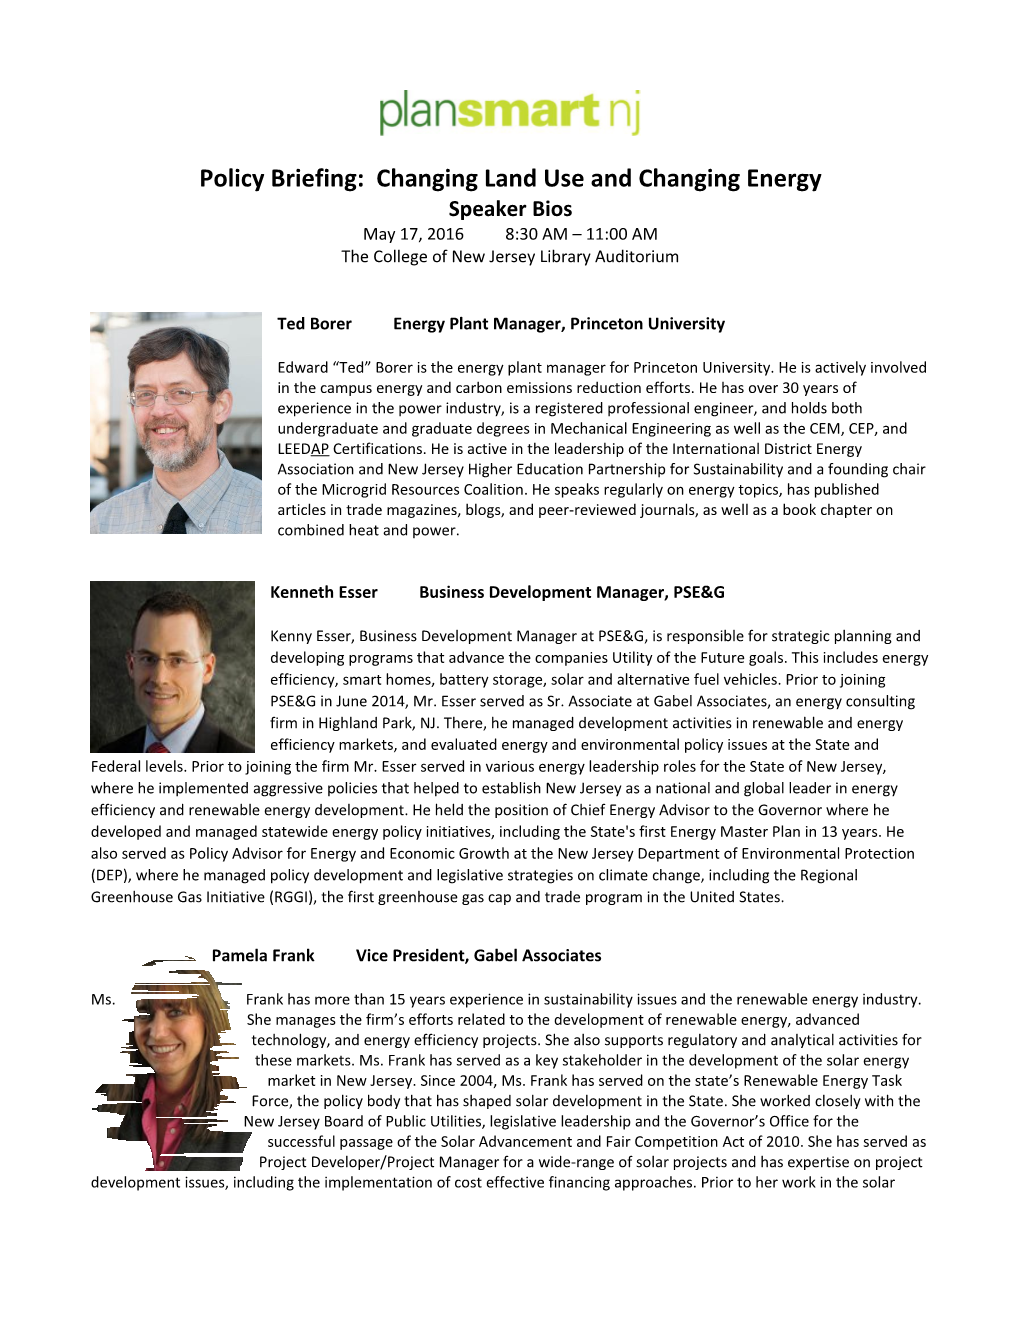 Policy Briefing: Changing Land Use and Changing Energy